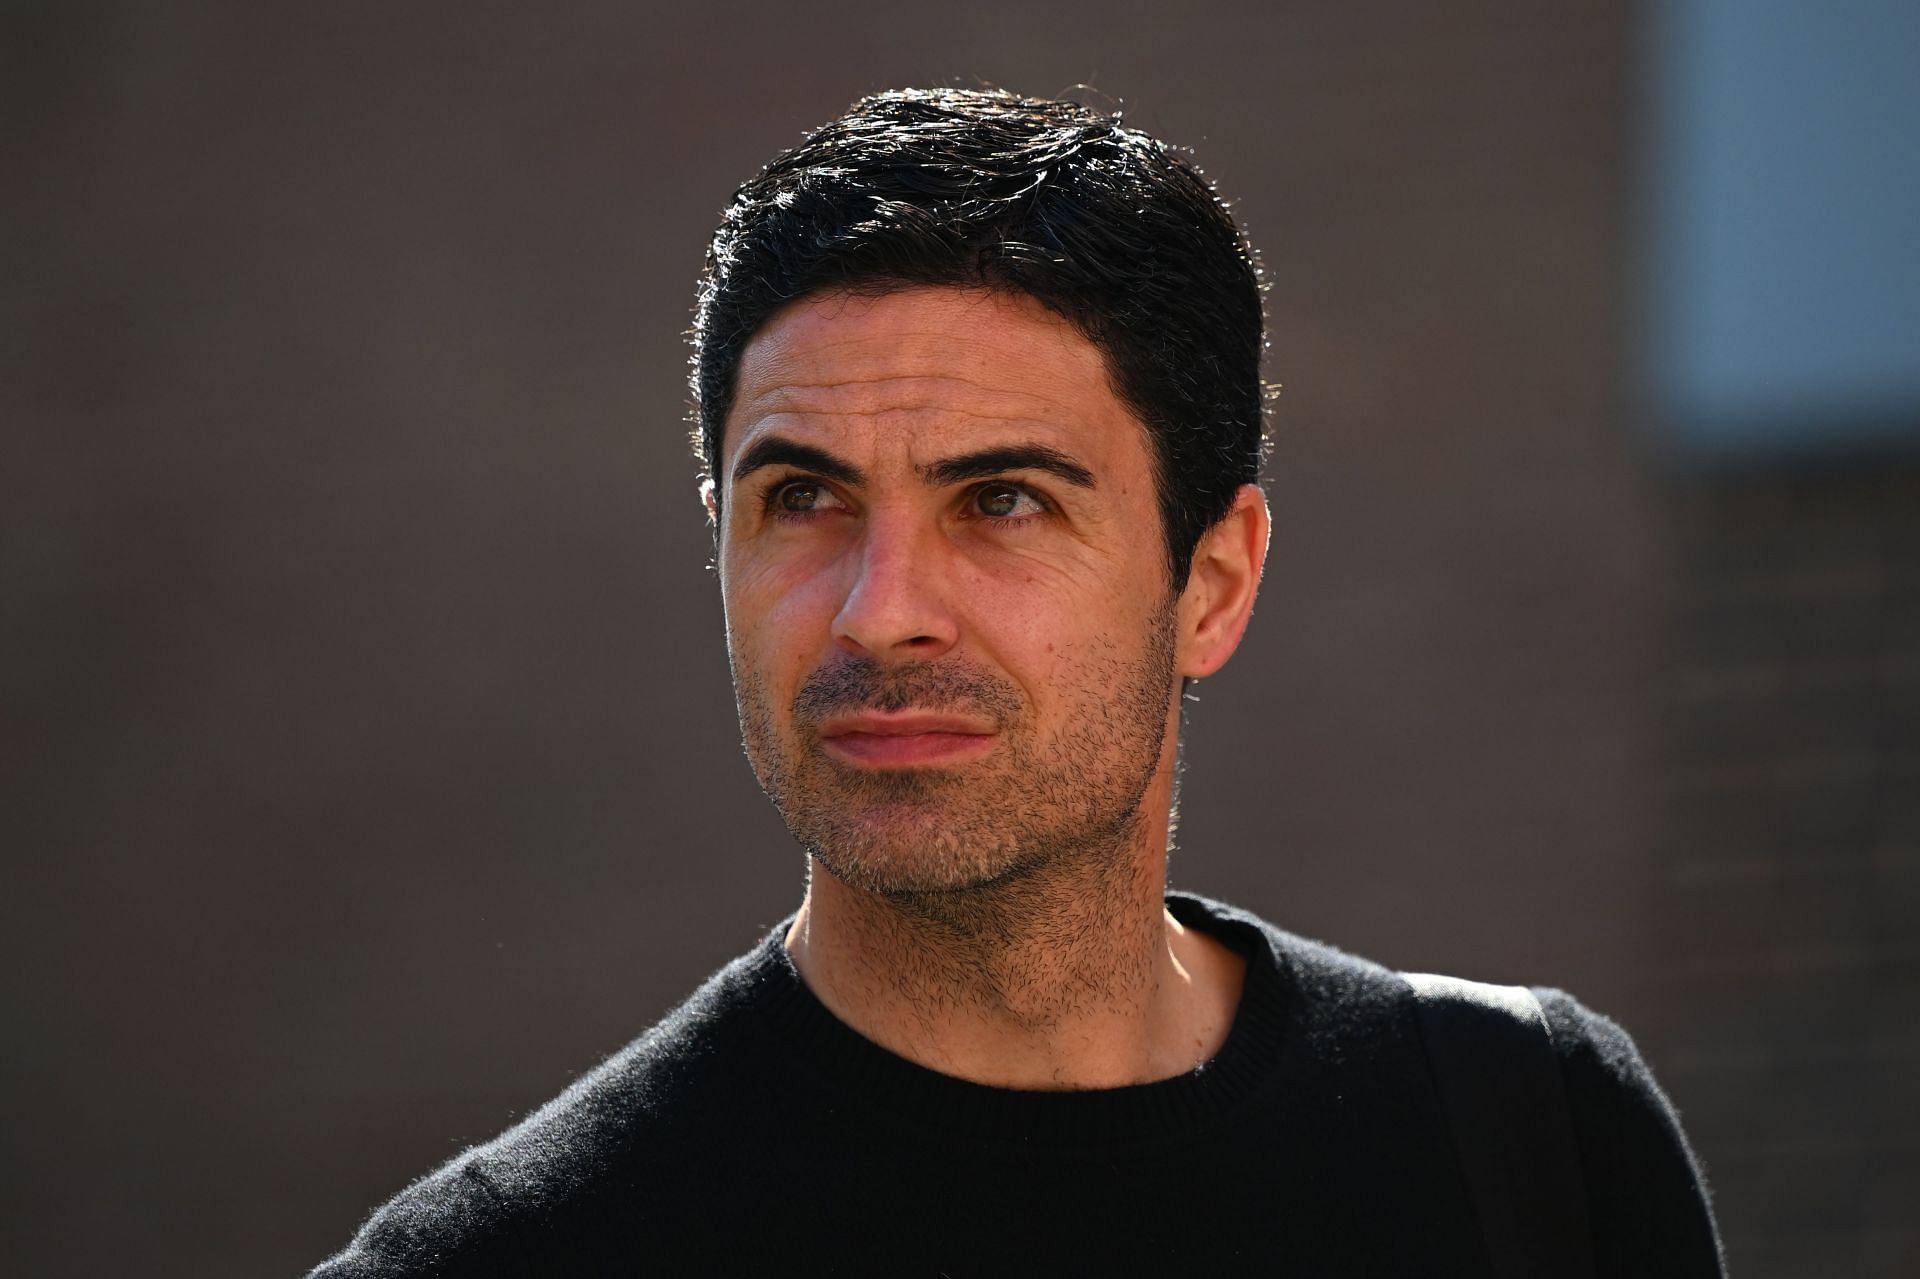 Arsenal manager Mikel Arteta is working to upgrade his squad